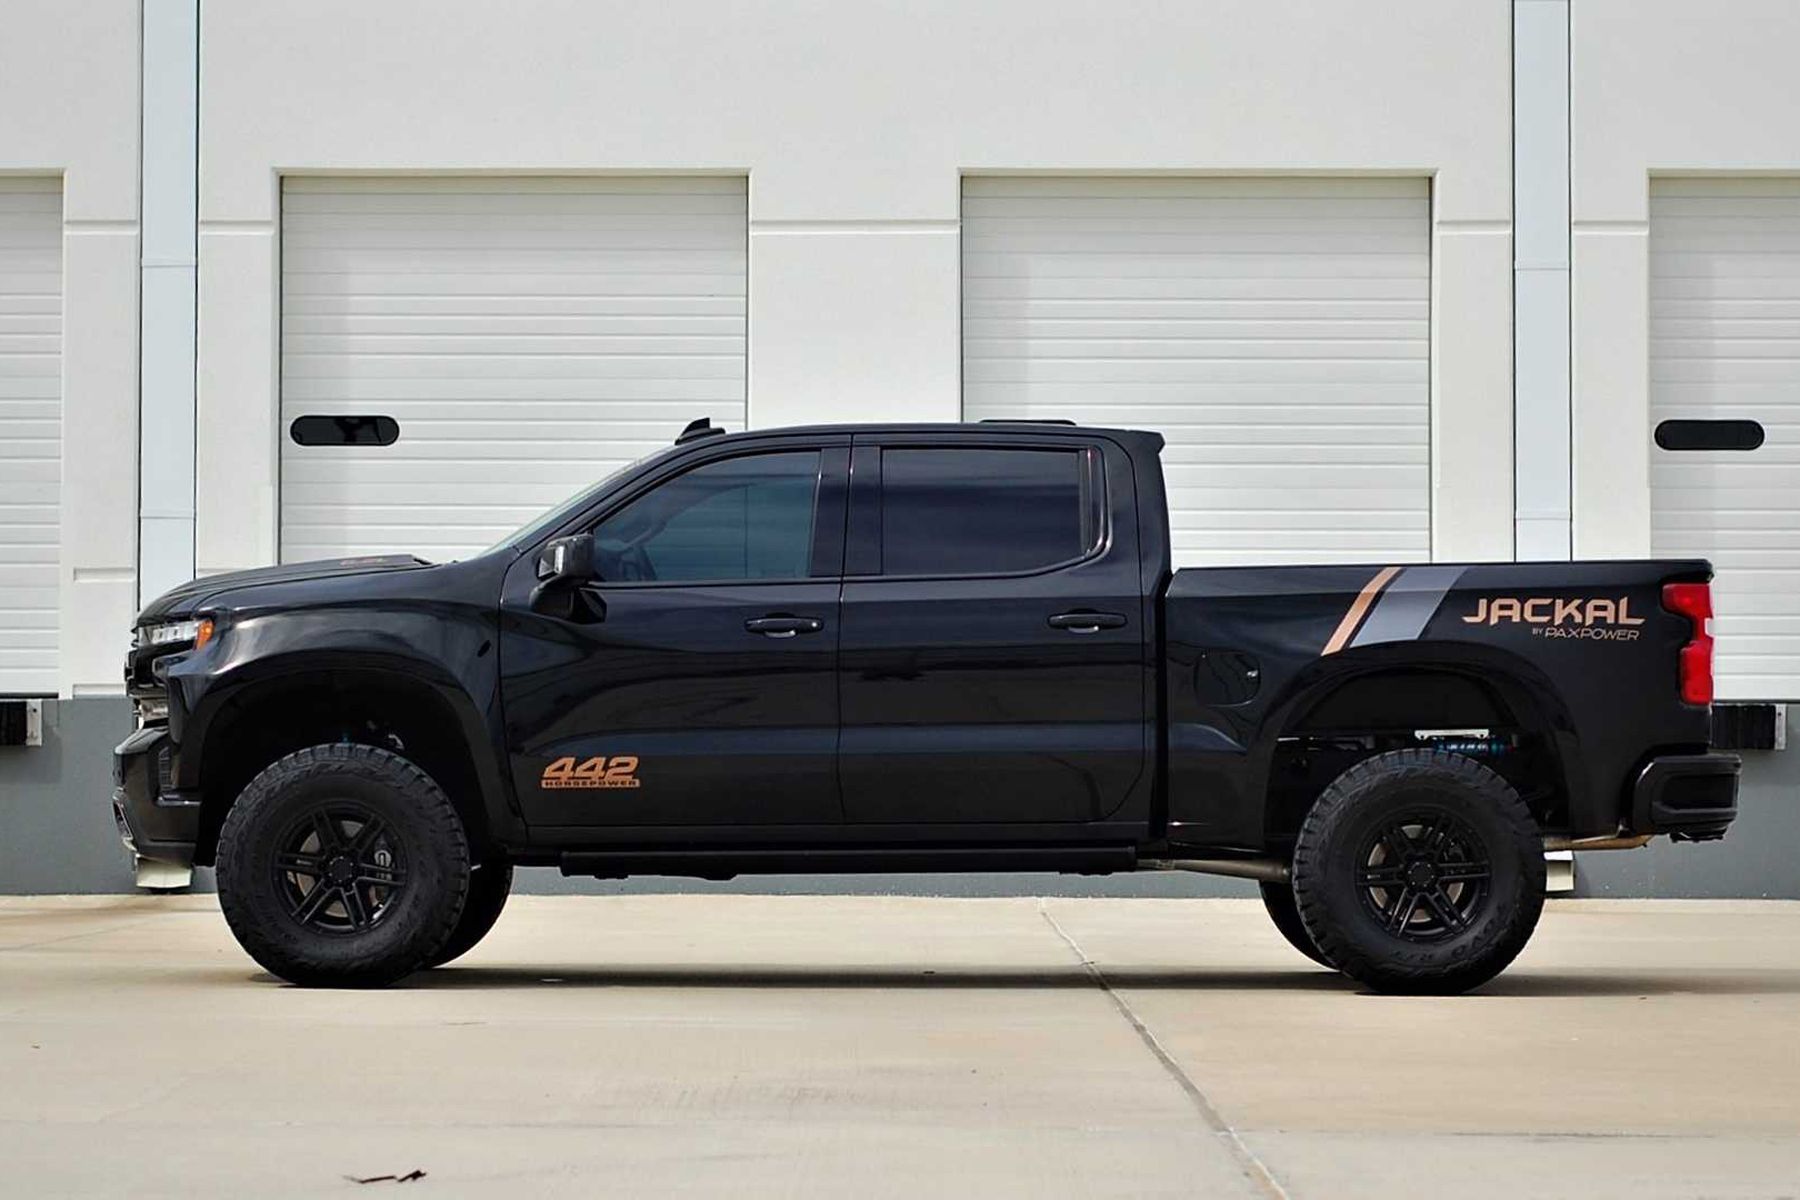 The 'Jackal' is a Ford Raptor-rivaling off-road Chevy Silverado. 